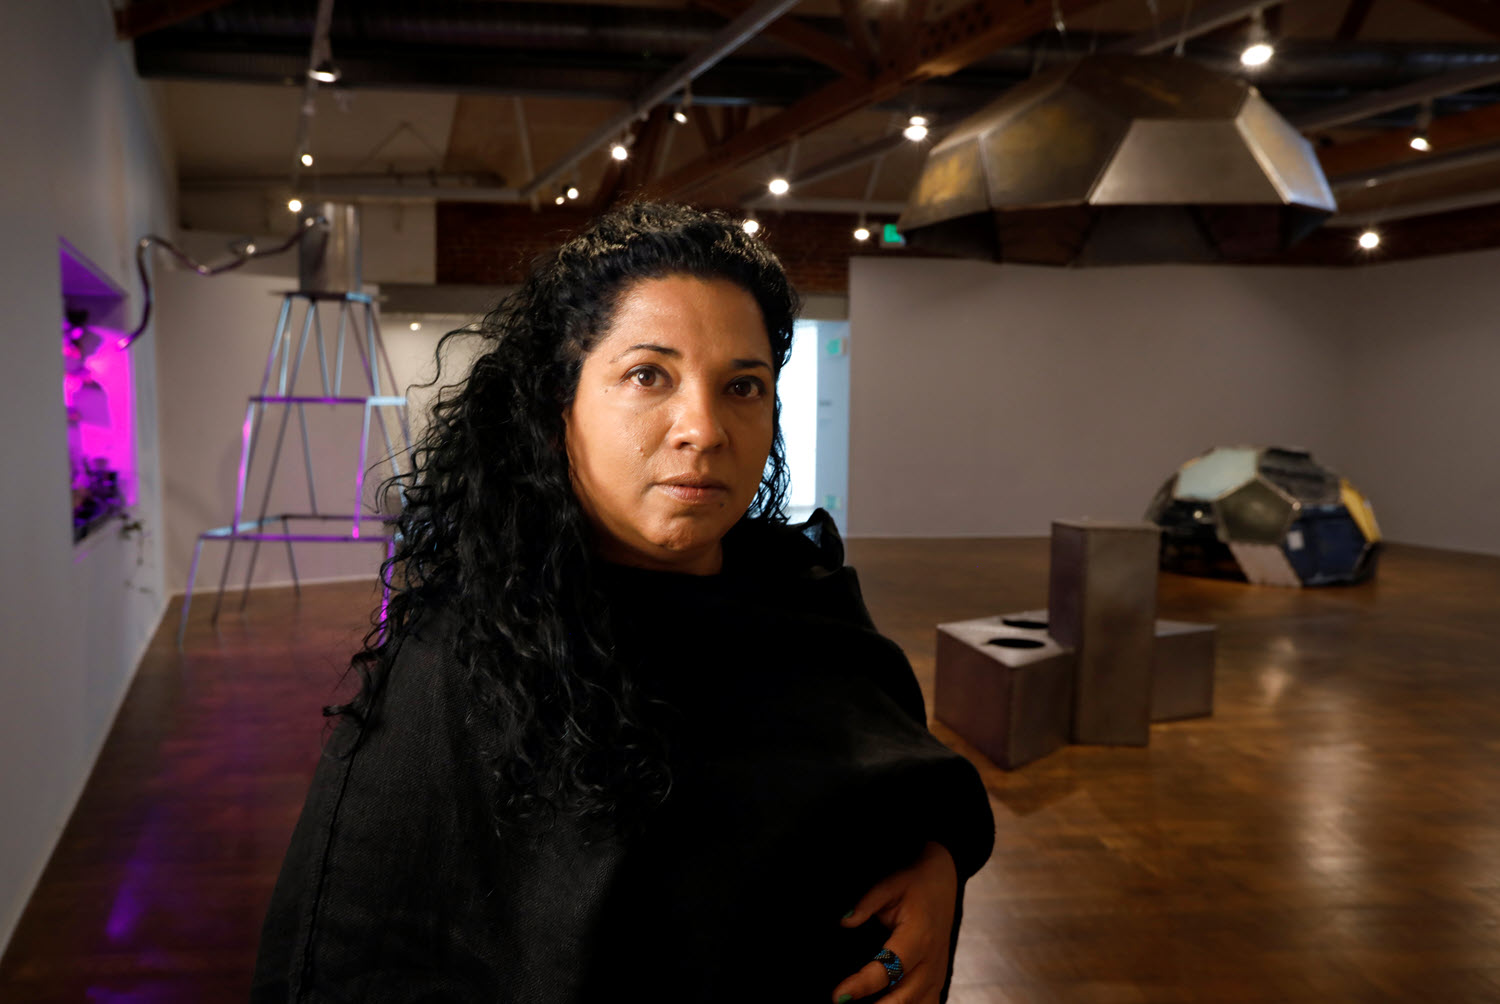 Artist Beatriz Cortez. Photo credit Carolyn Cole, LA Times. Courtesy of the artist and Commonwealth and Council.